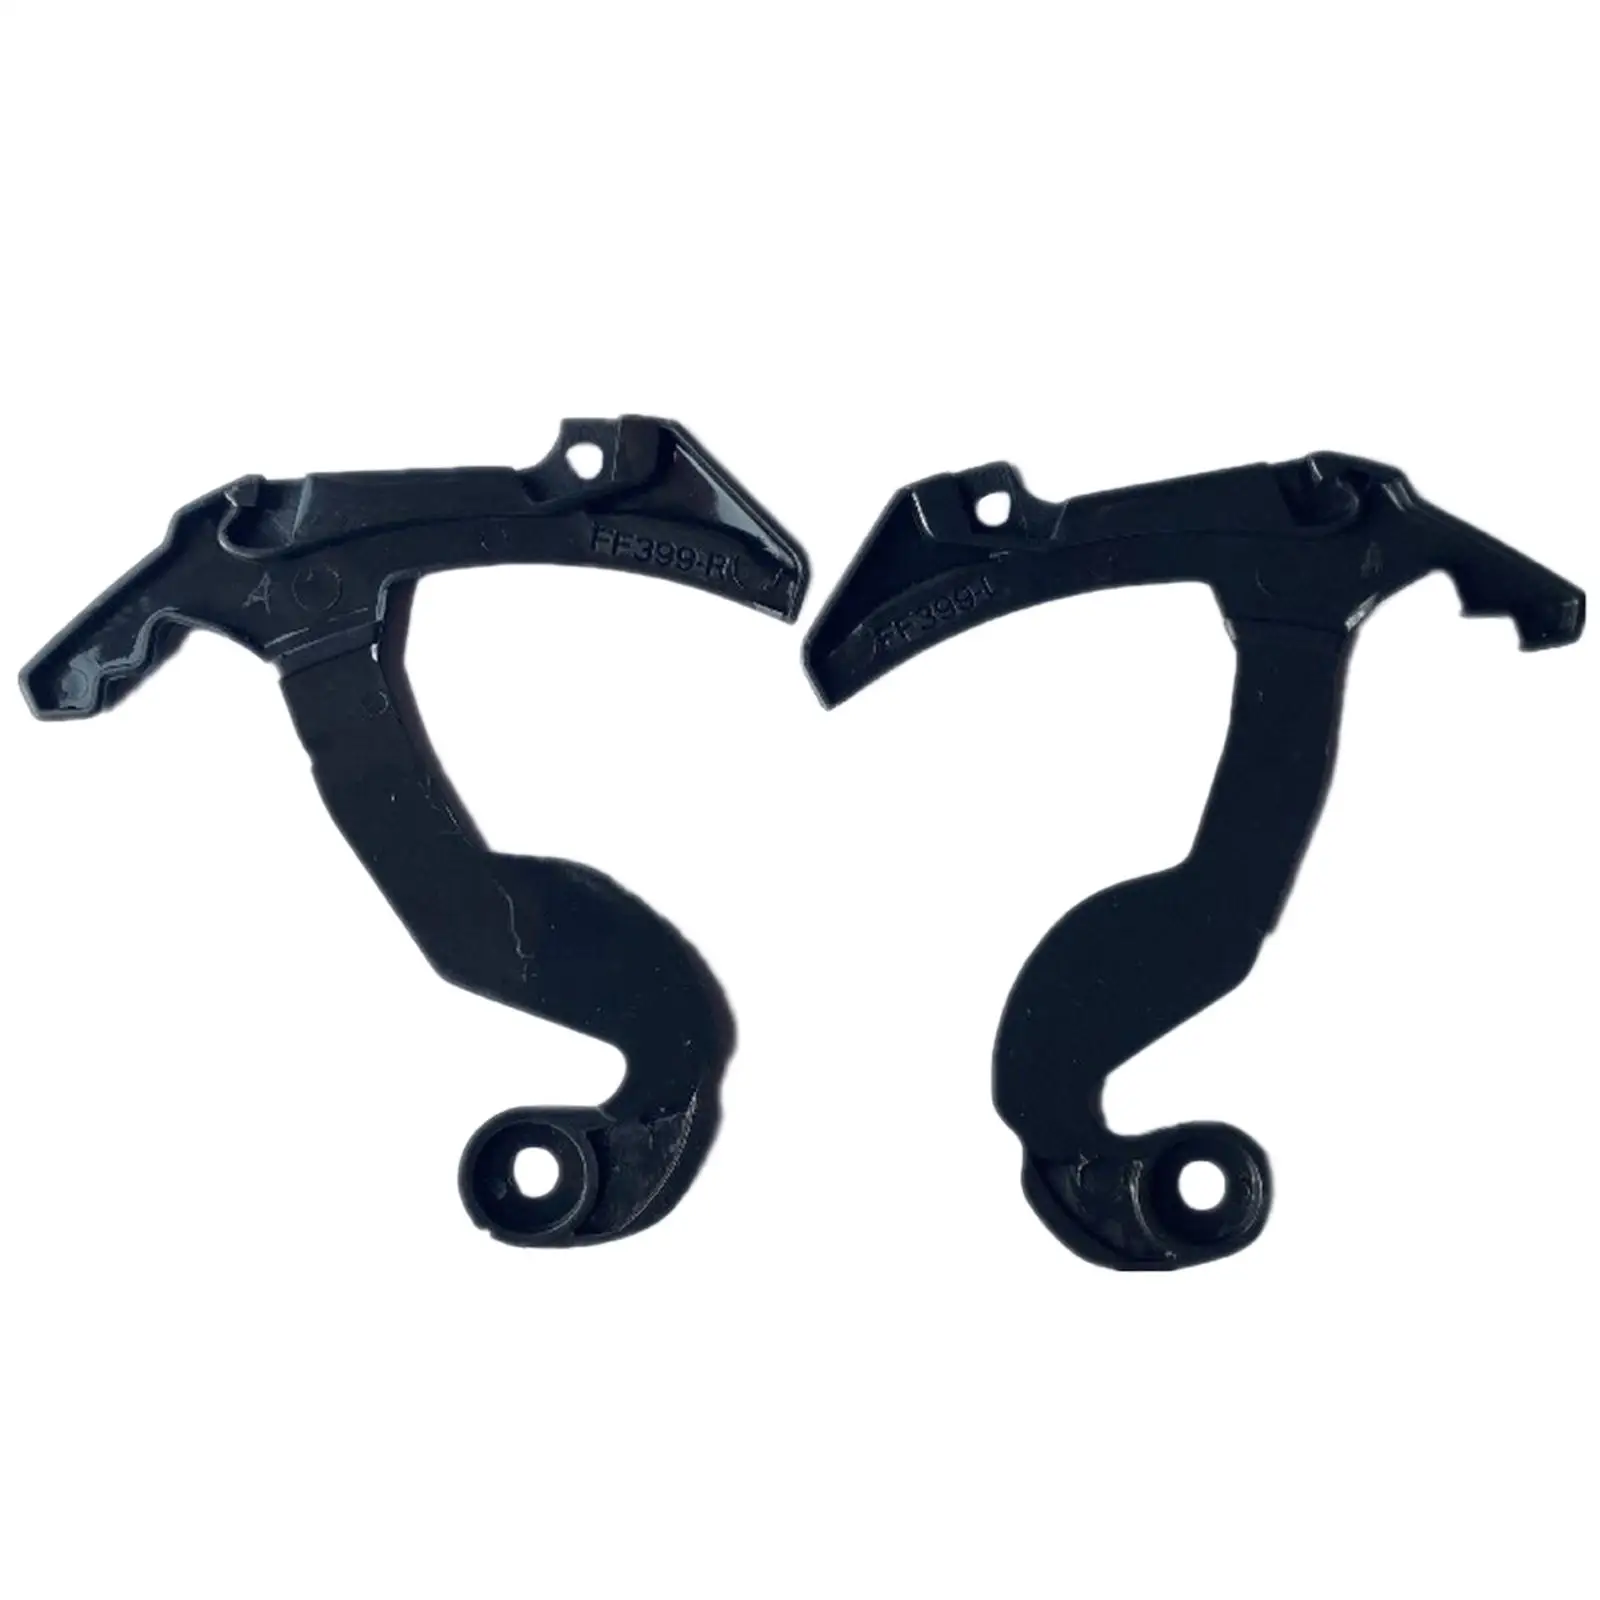 2x Motorcycle Ff399   Accessories Fit for Ff396s